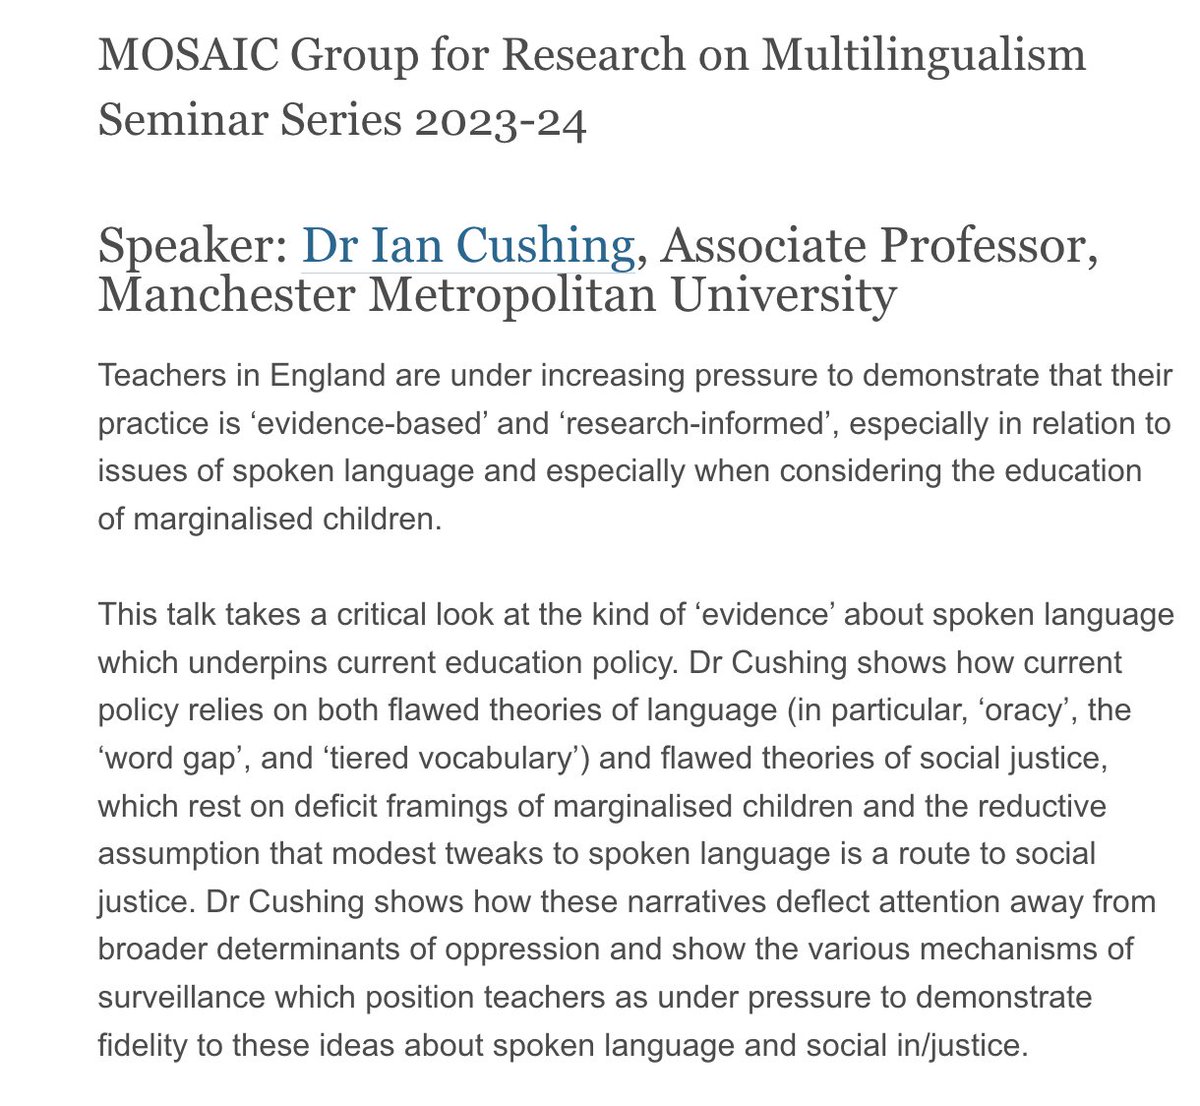 i'm speaking at the university of birmingham this thursday (2-3pm) if local folks are free and interested in hearing about how 'research evidence' about spoken language in education policy relies on deficit perspectives about marginalised communities. birmingham.ac.uk/schools/educat…